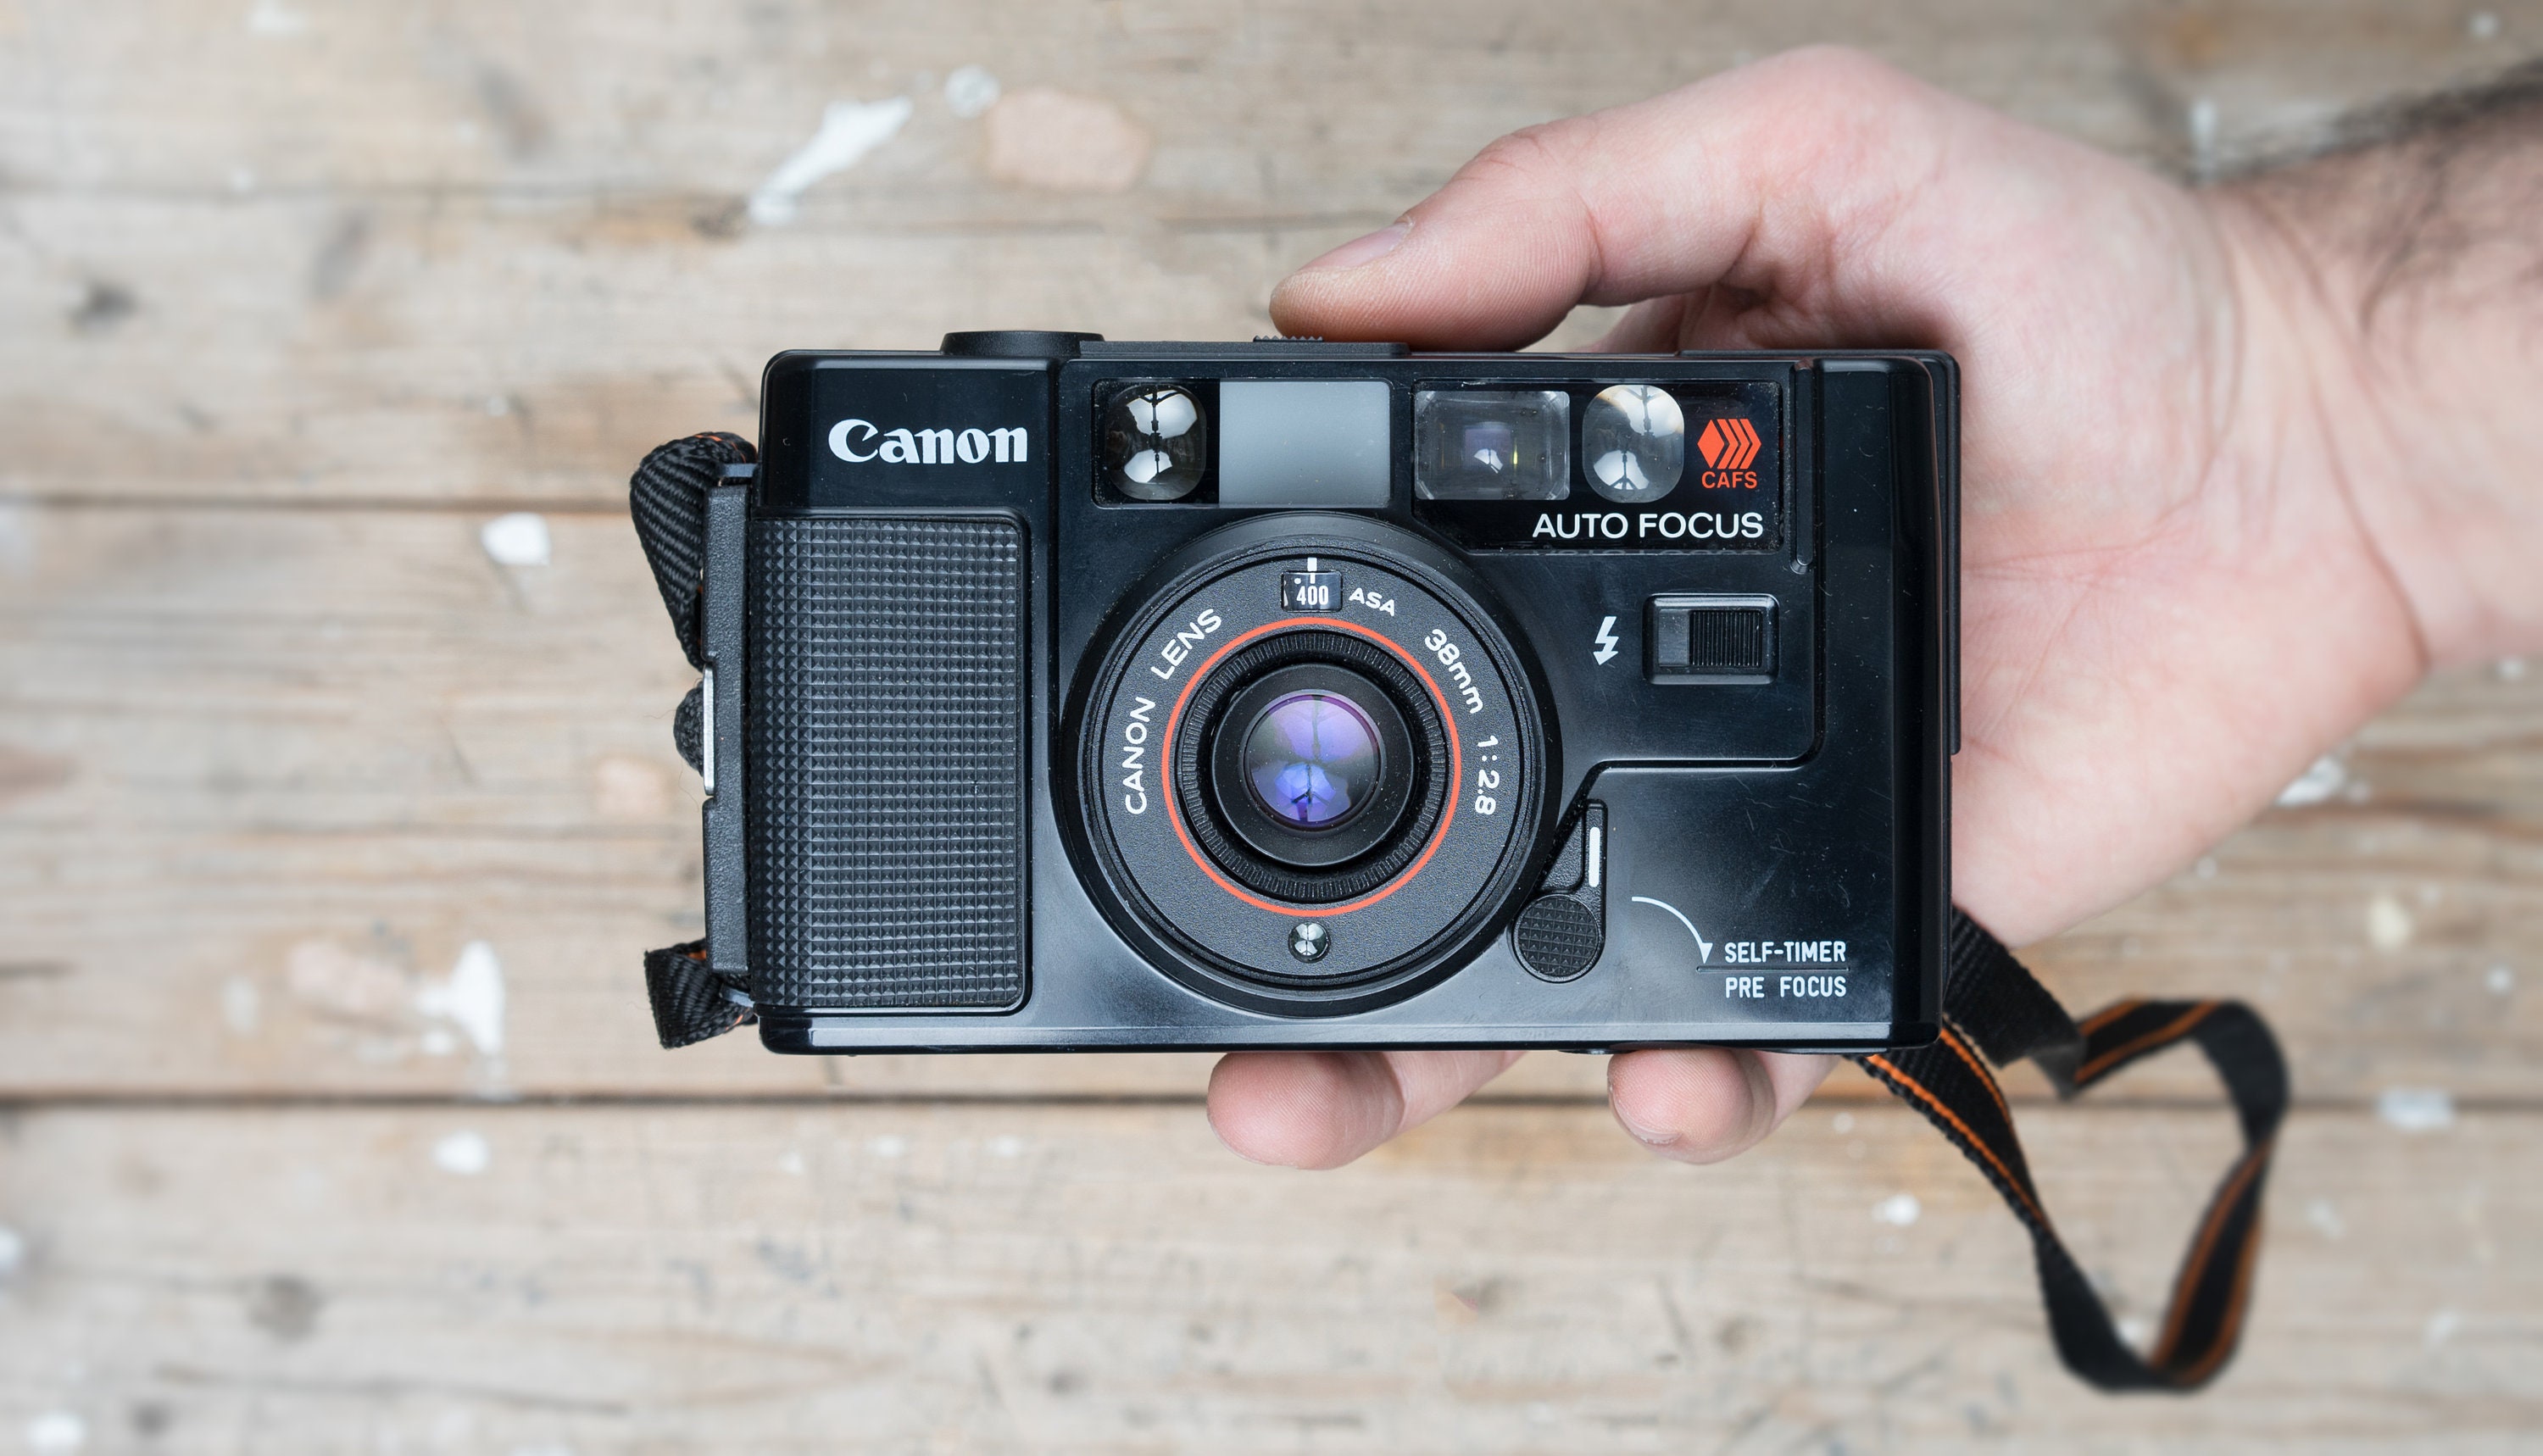 Canon AF35M / Canon Sure Shot / Canon Autoboy / Canon 38mm f/2.8 Lens /  Vintage 35mm film Point-and-Shoot camera / TESTED